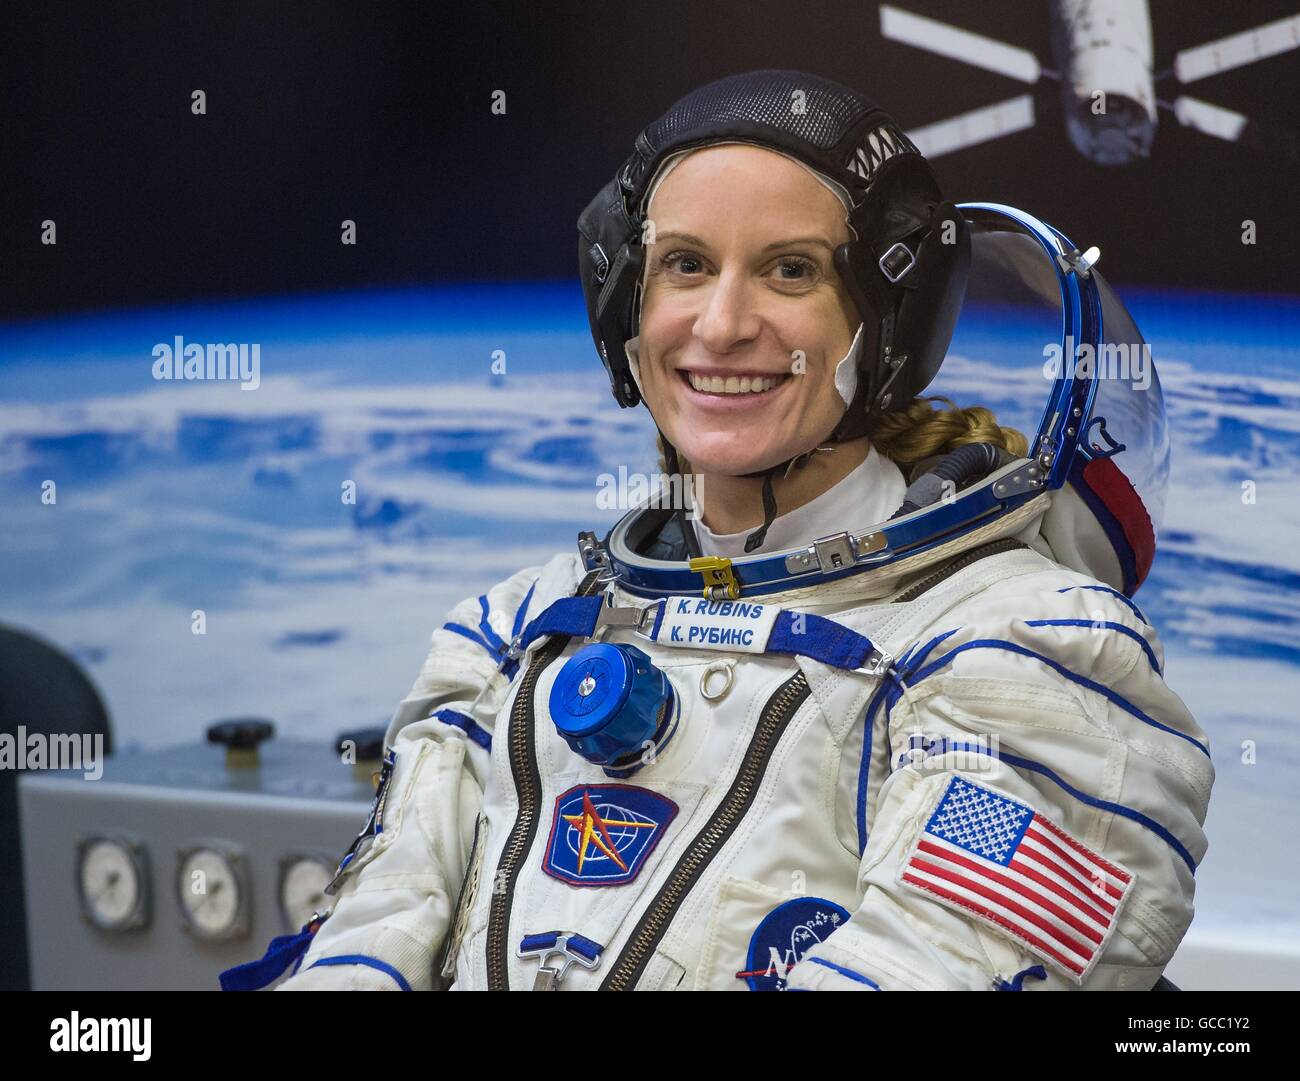 International Space Station Expedition 48 American astronaut Kate Rubins is suited up in her Russian Sokol launch and entry suit in preparation for launch July 7, 2016 at the Baikonur Cosmodrome in Kazakhstan. Rubens joins crew members Russian cosmonaut Anatoly Ivanishin and Japanese astronaut Takuya Onishi on four-month mission. Stock Photo